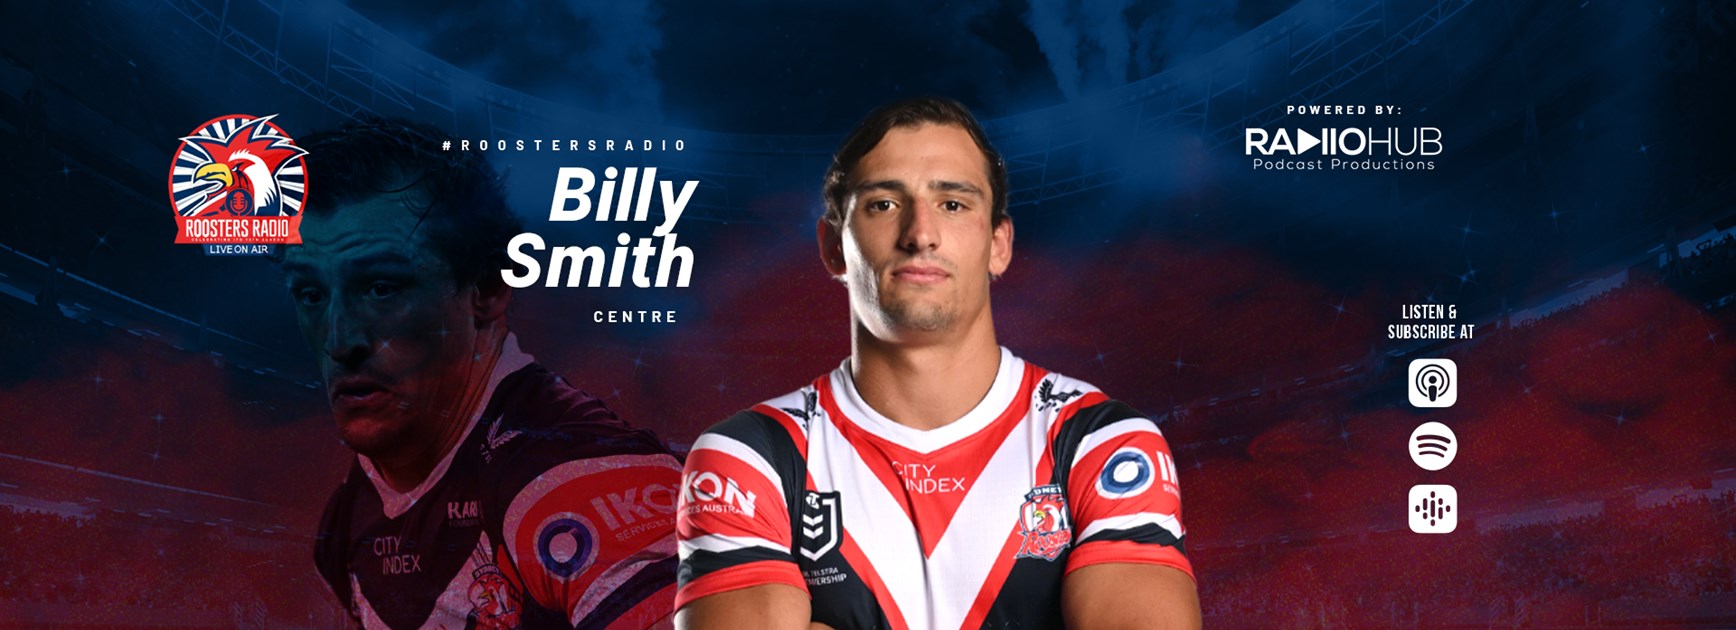 Roosters Radio Ep 169: Billy Smith